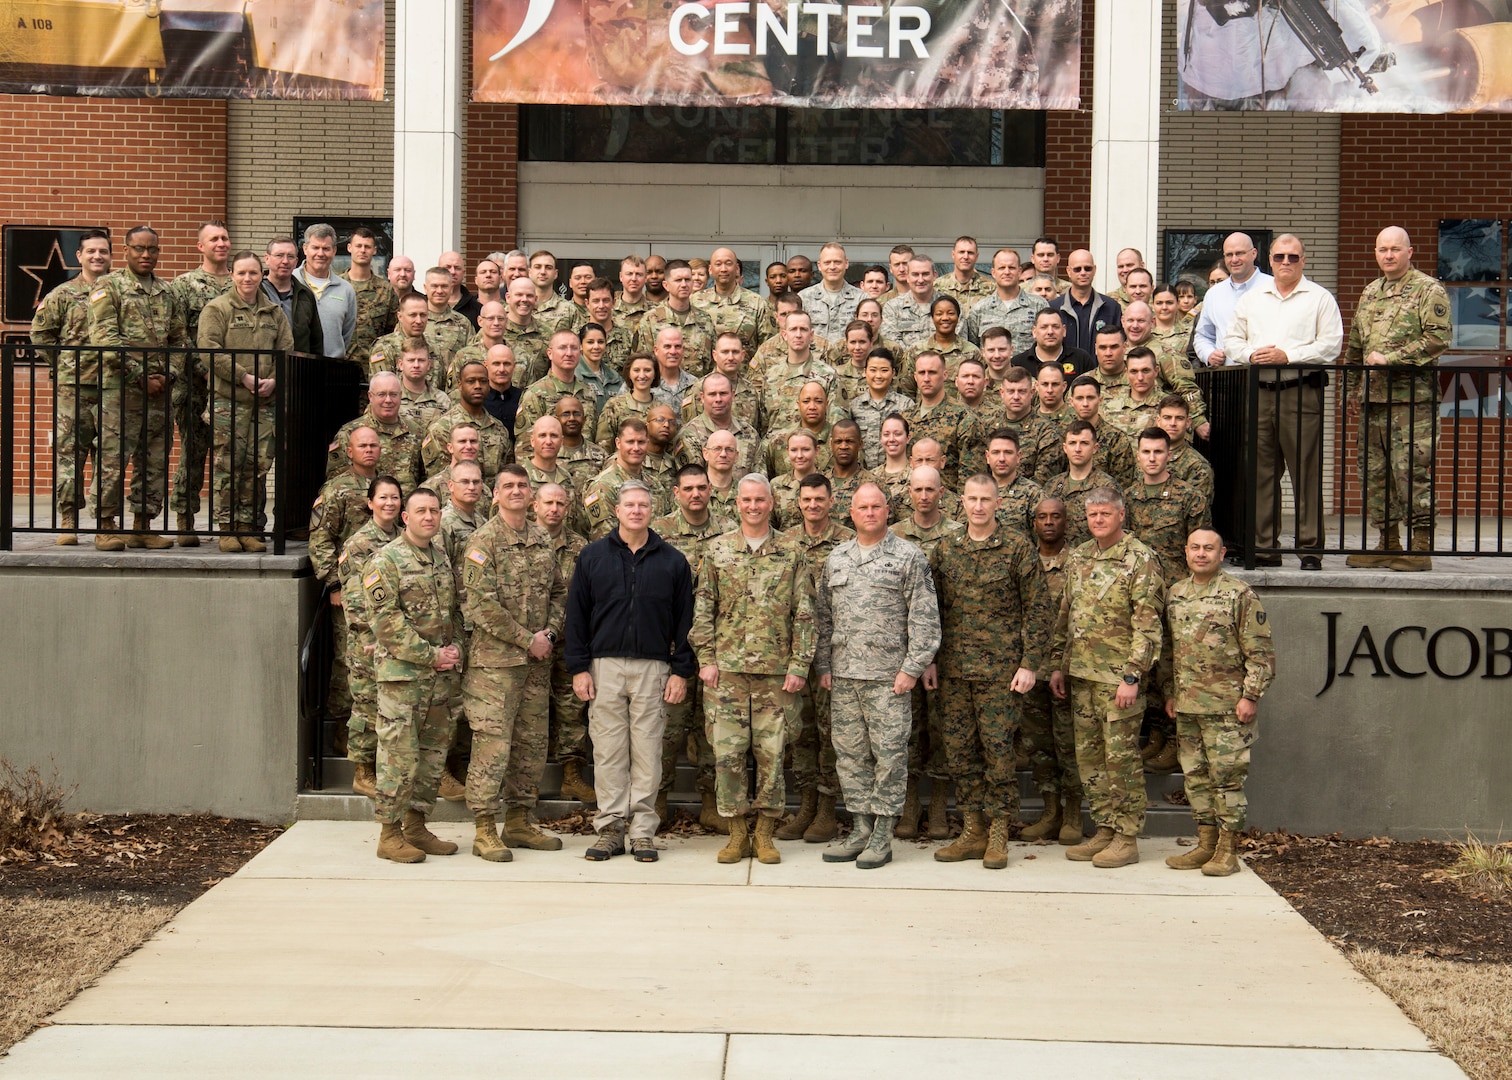 FORT EUSTIS, Va. -- Attendees of the Defense Chemical, Biological, Radiological and Nuclear Response (DCRF) Commanders Conference pose for a group photo outside the Jacob's Conference Center at Fort Langley Eustis, Va. March 8, 2018. The three-day conference allowed Joint Task Force Civil Support (JTF-CS) and DCRF leadership to review how thousands of military service members would respond to a catastrophic disaster in the U.S, whether manmade or natural.  JTF-CS provides command and control for designated Department of Defense specialized response forces to assist local, state, federal and tribal partners in saving lives, preventing further injury, and providing critical support to enable community recovery.